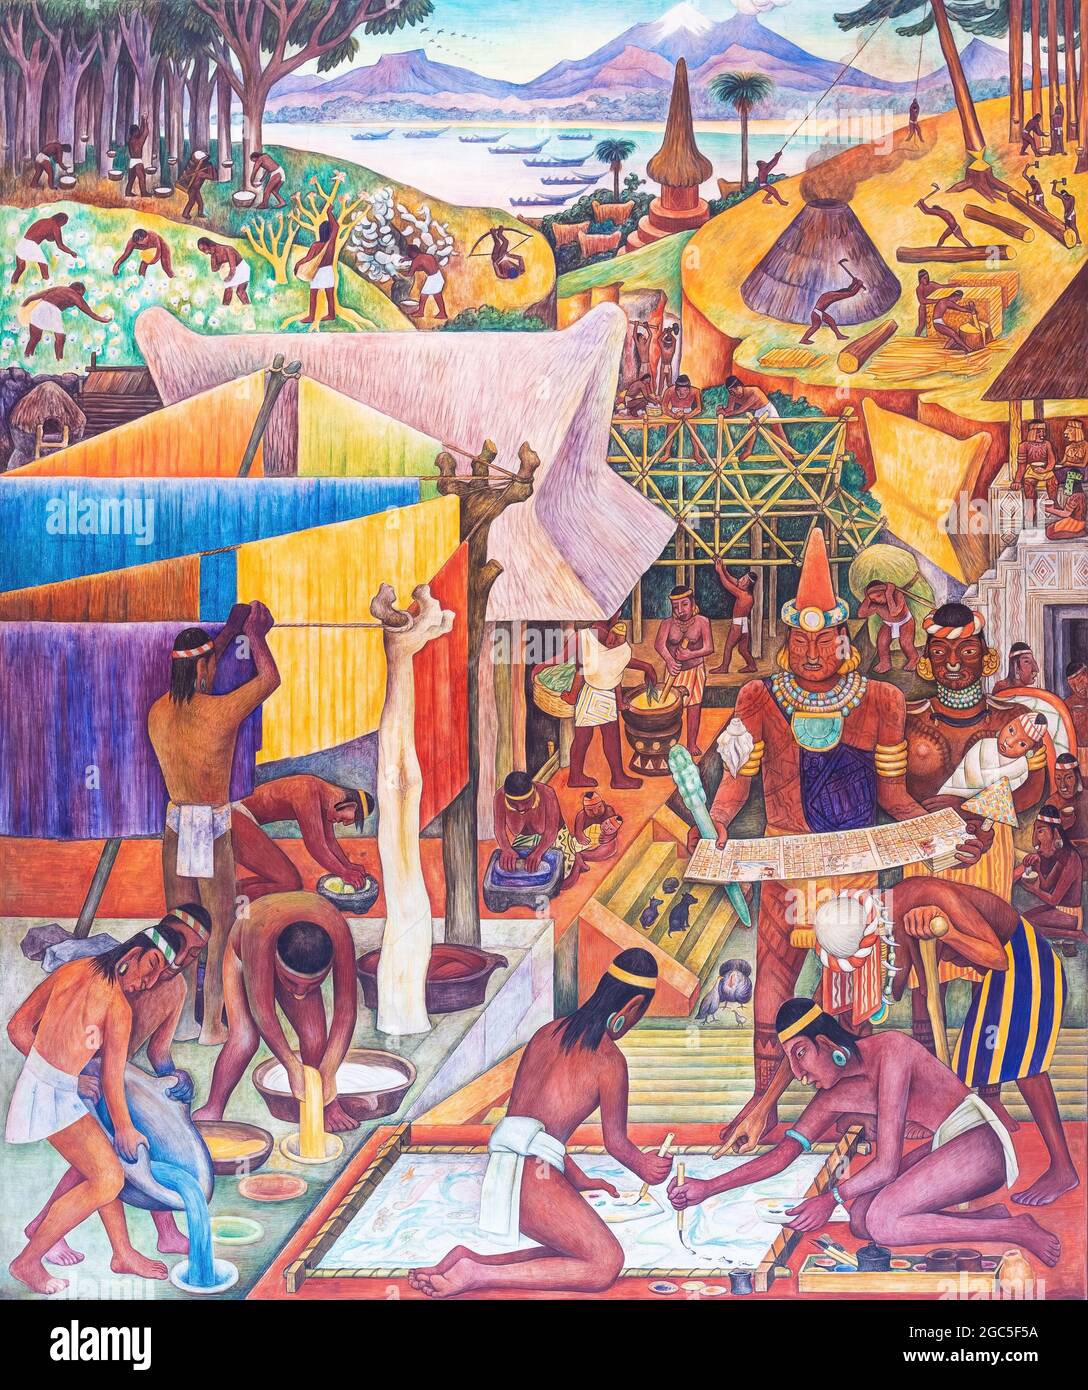 Diego Rivera mural of painters and dyers in Tenochtitlan, Presidencial Palace, Mexico City, Mexico. Stock Photo